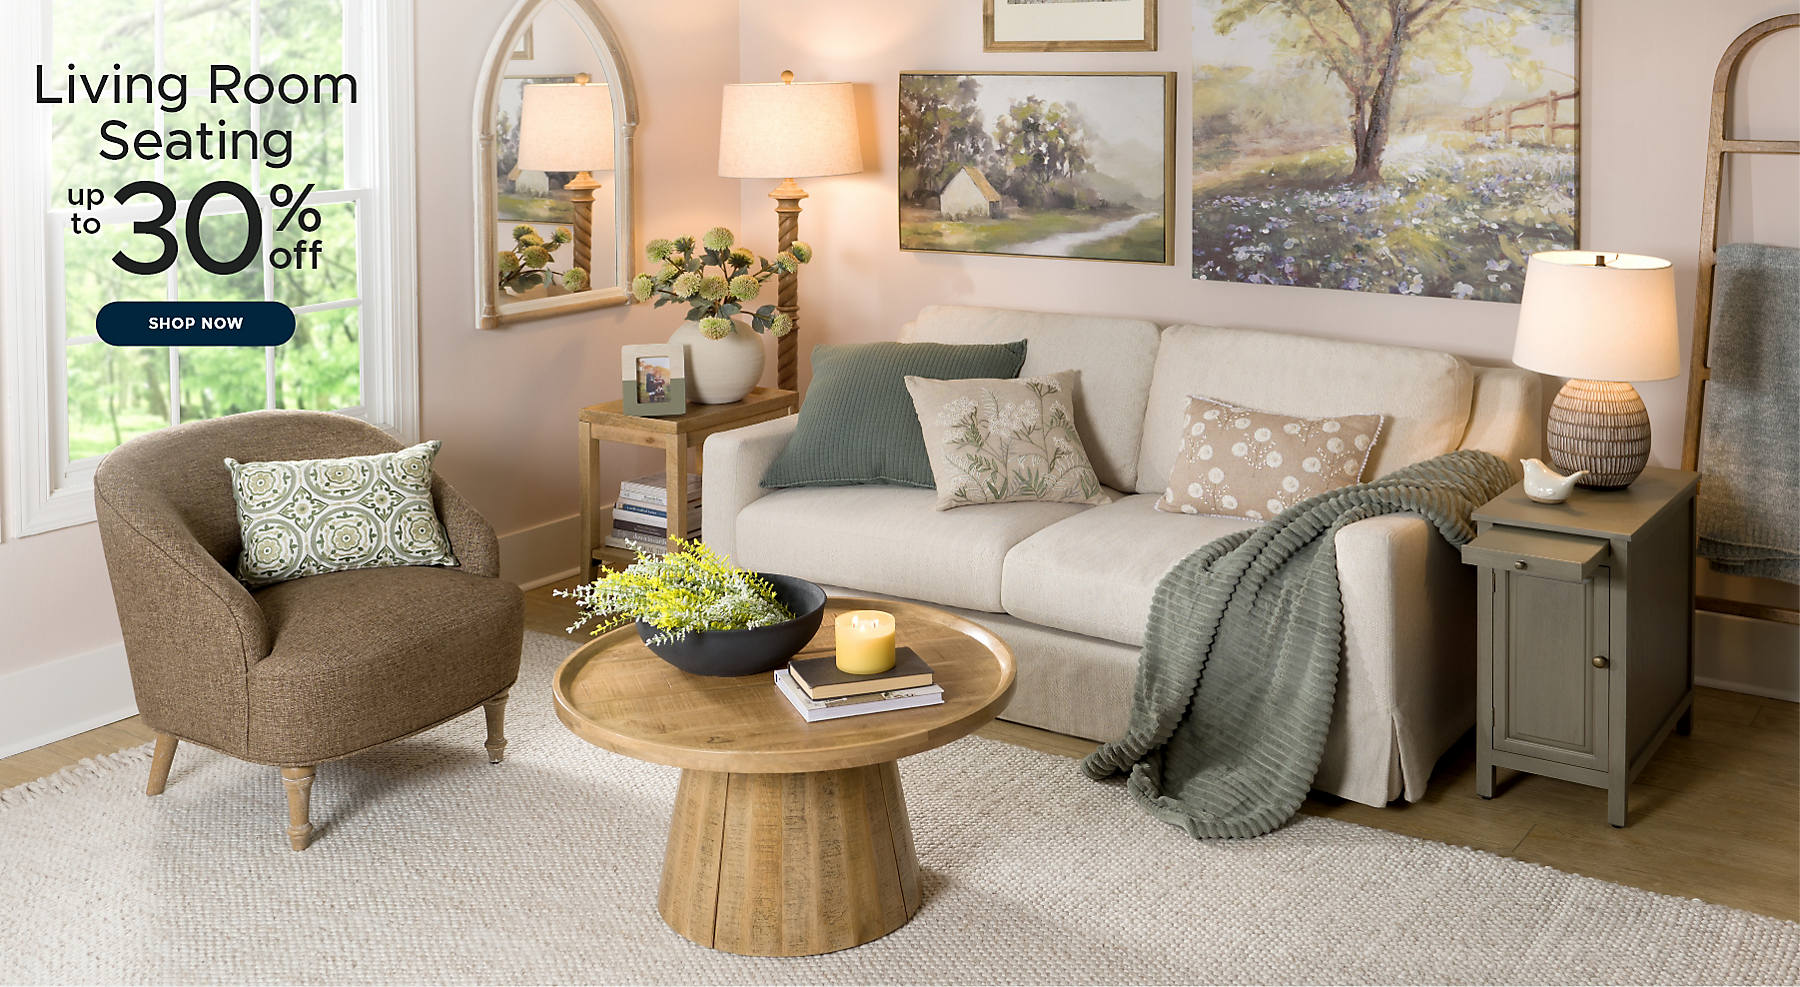 Living Room Seating up to 30% off shop now